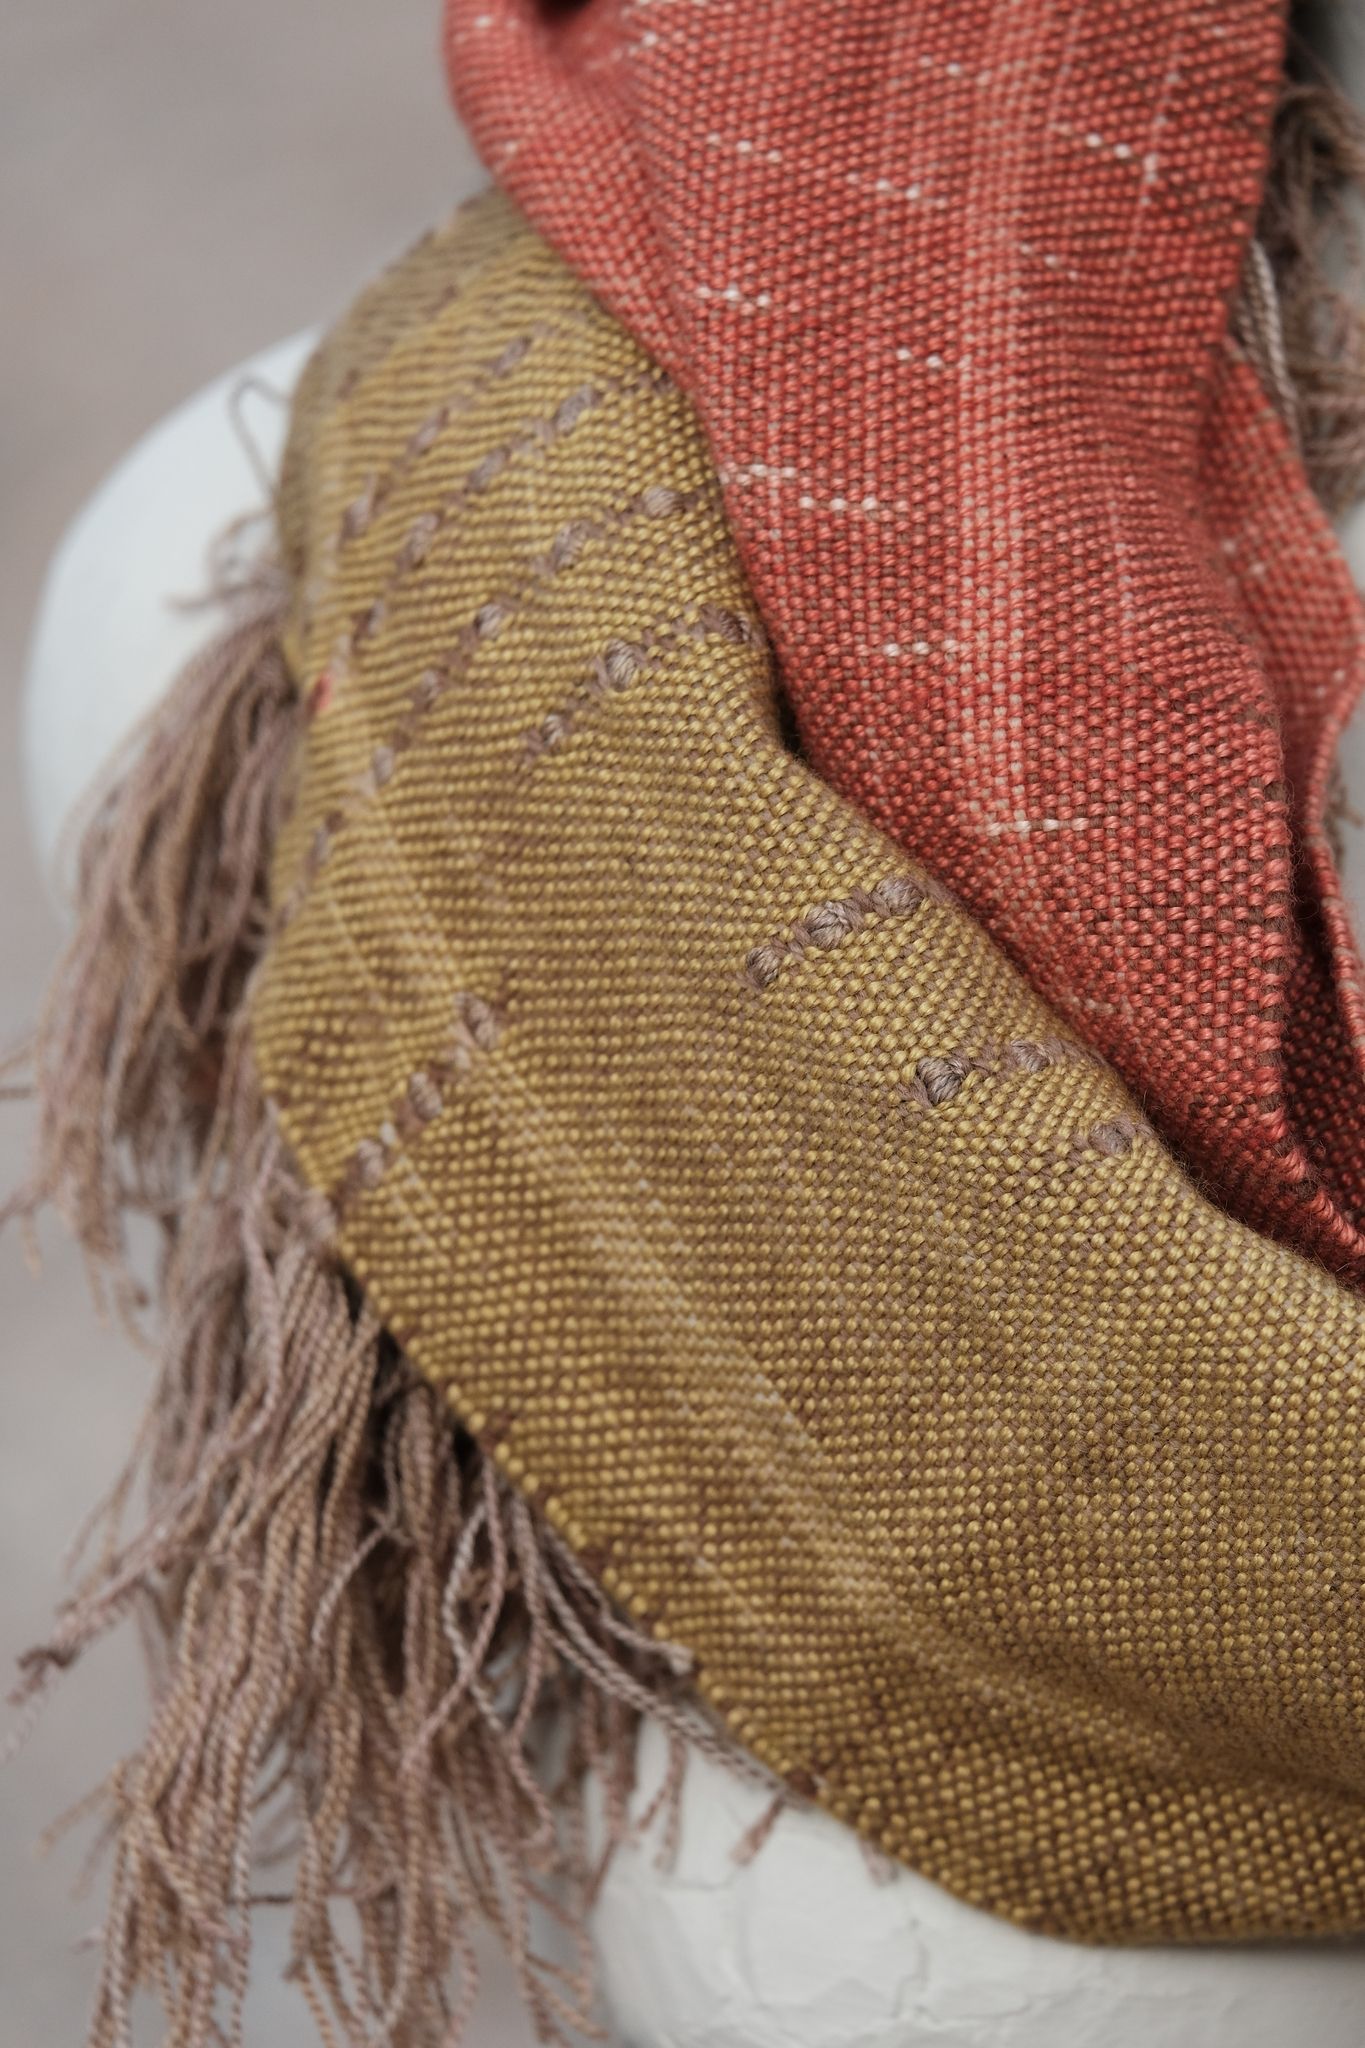 handwoven highly textured scarf that is mustard, brown, grey-blue and salmon colored, on a white mannequin sitting on a rock